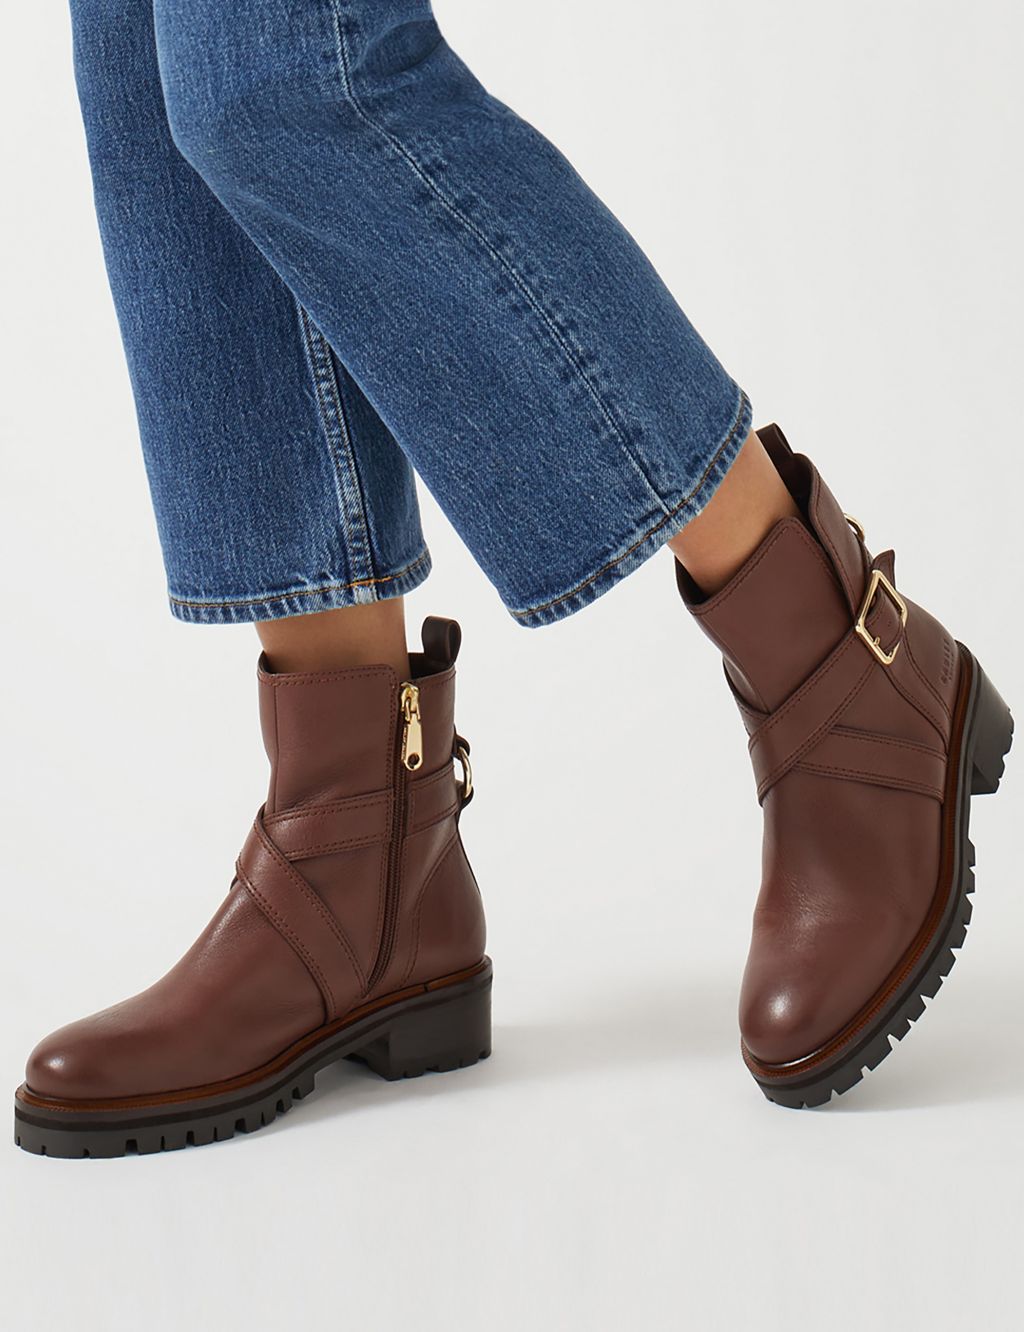 Leather Chunky Buckle Ankle Boots image 1